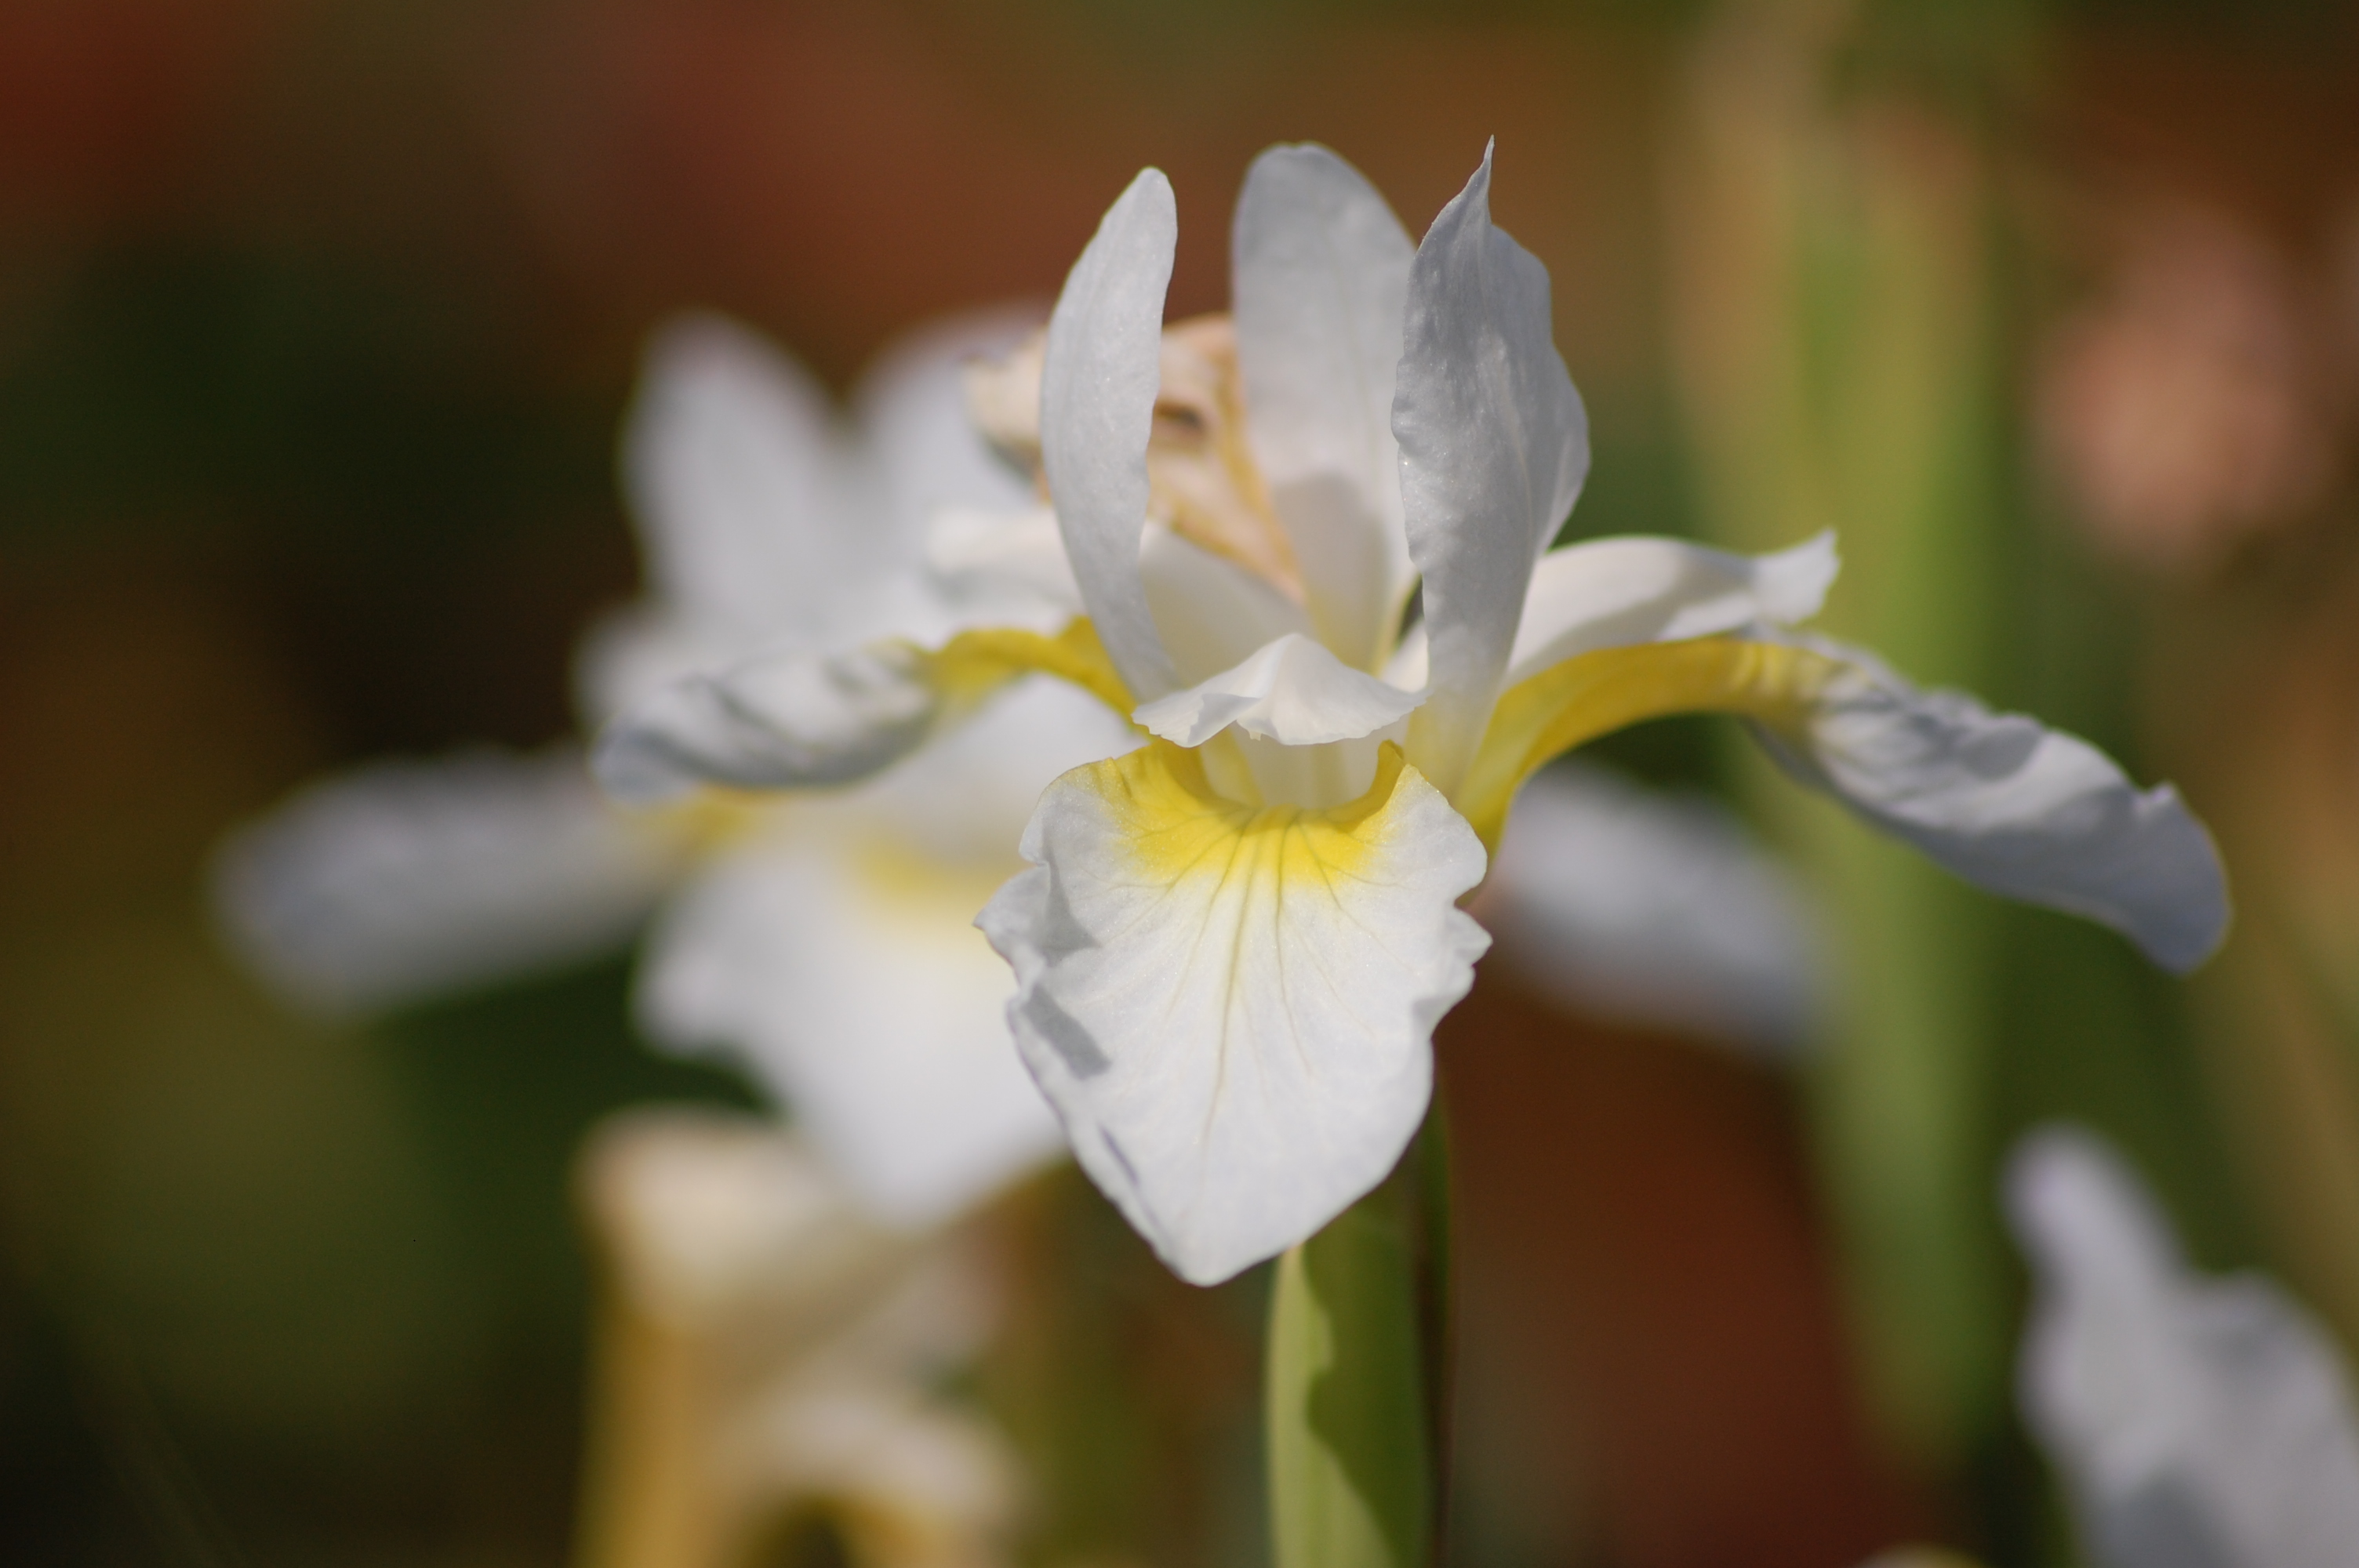 Get great deals on spring irises